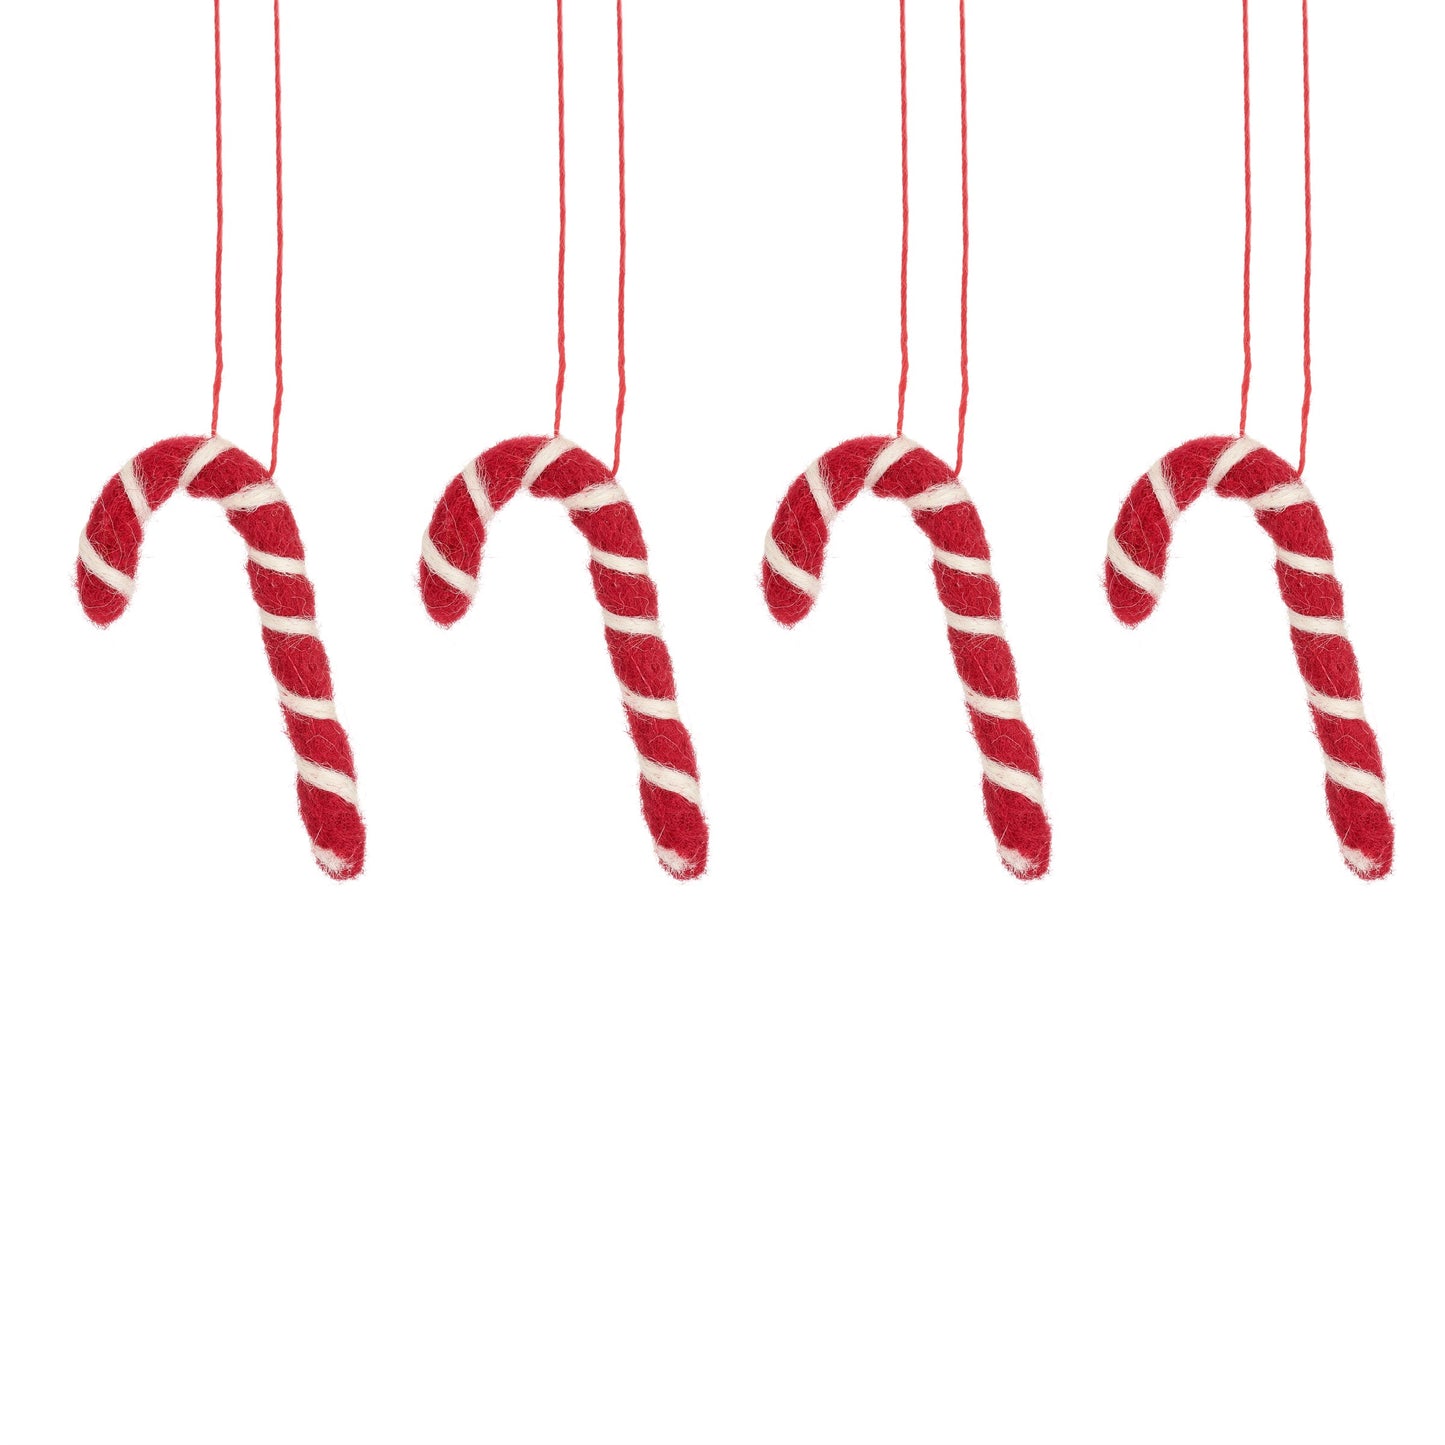 This image shows 4 mini red and white striped candy canes hanging from red string. 